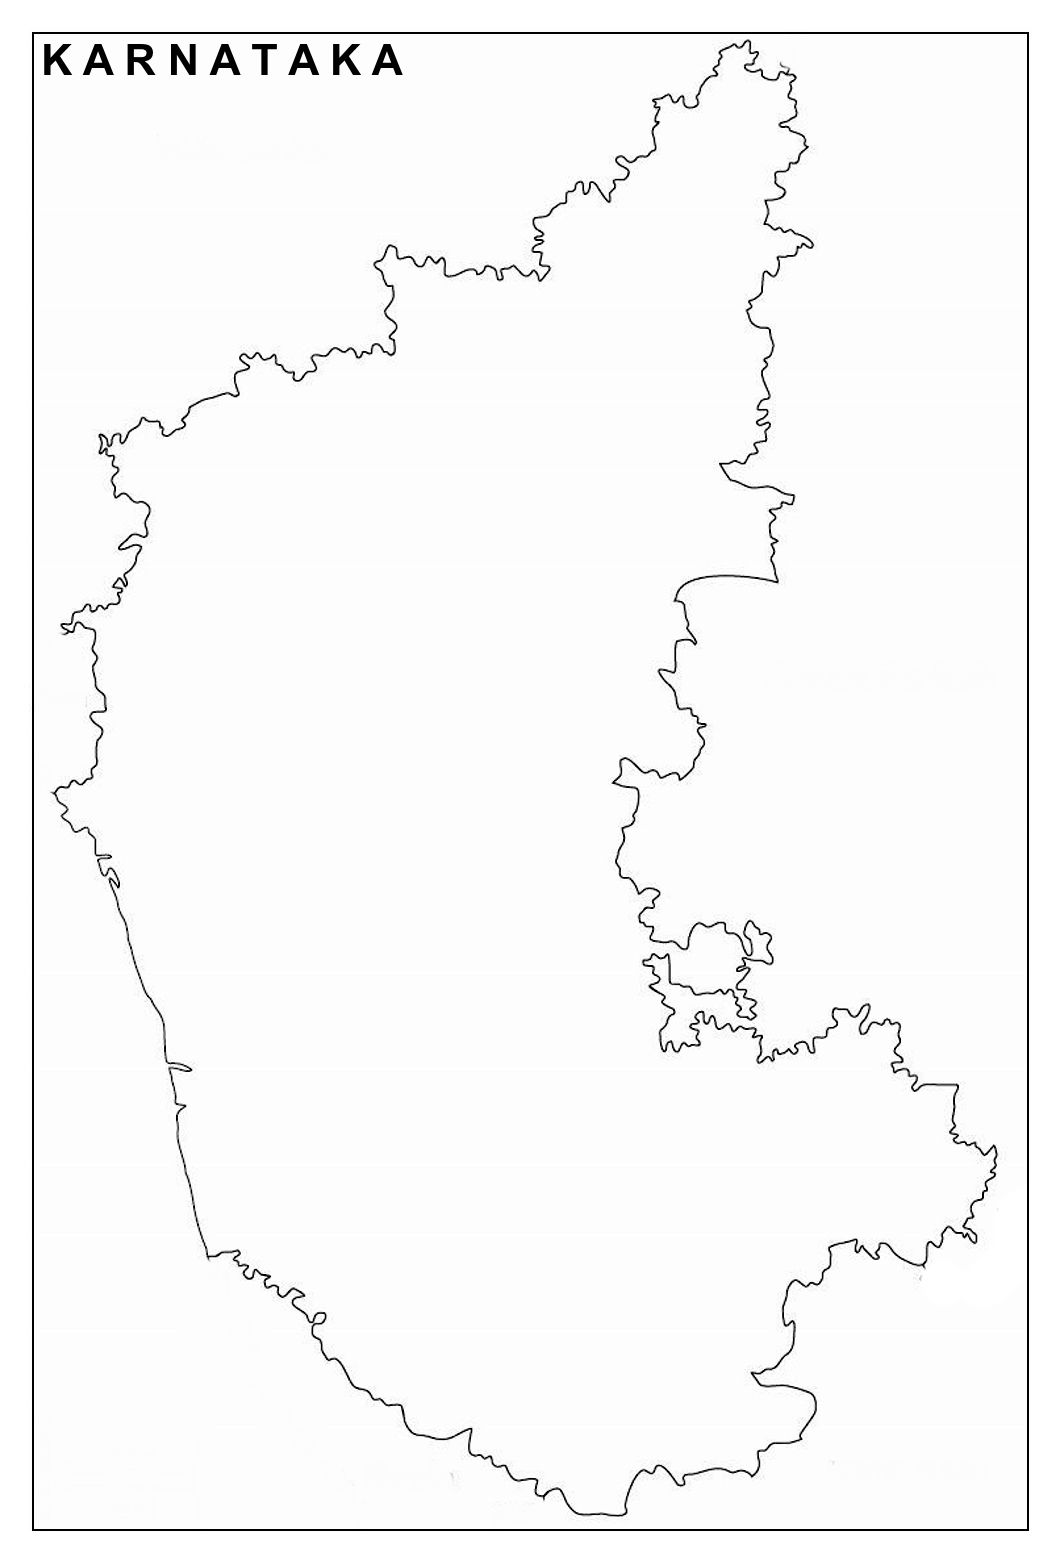 Karnataka Map Drawing Outline Draw the outline on the map by clicking a start point then clicking additional points to continue the outline around the area